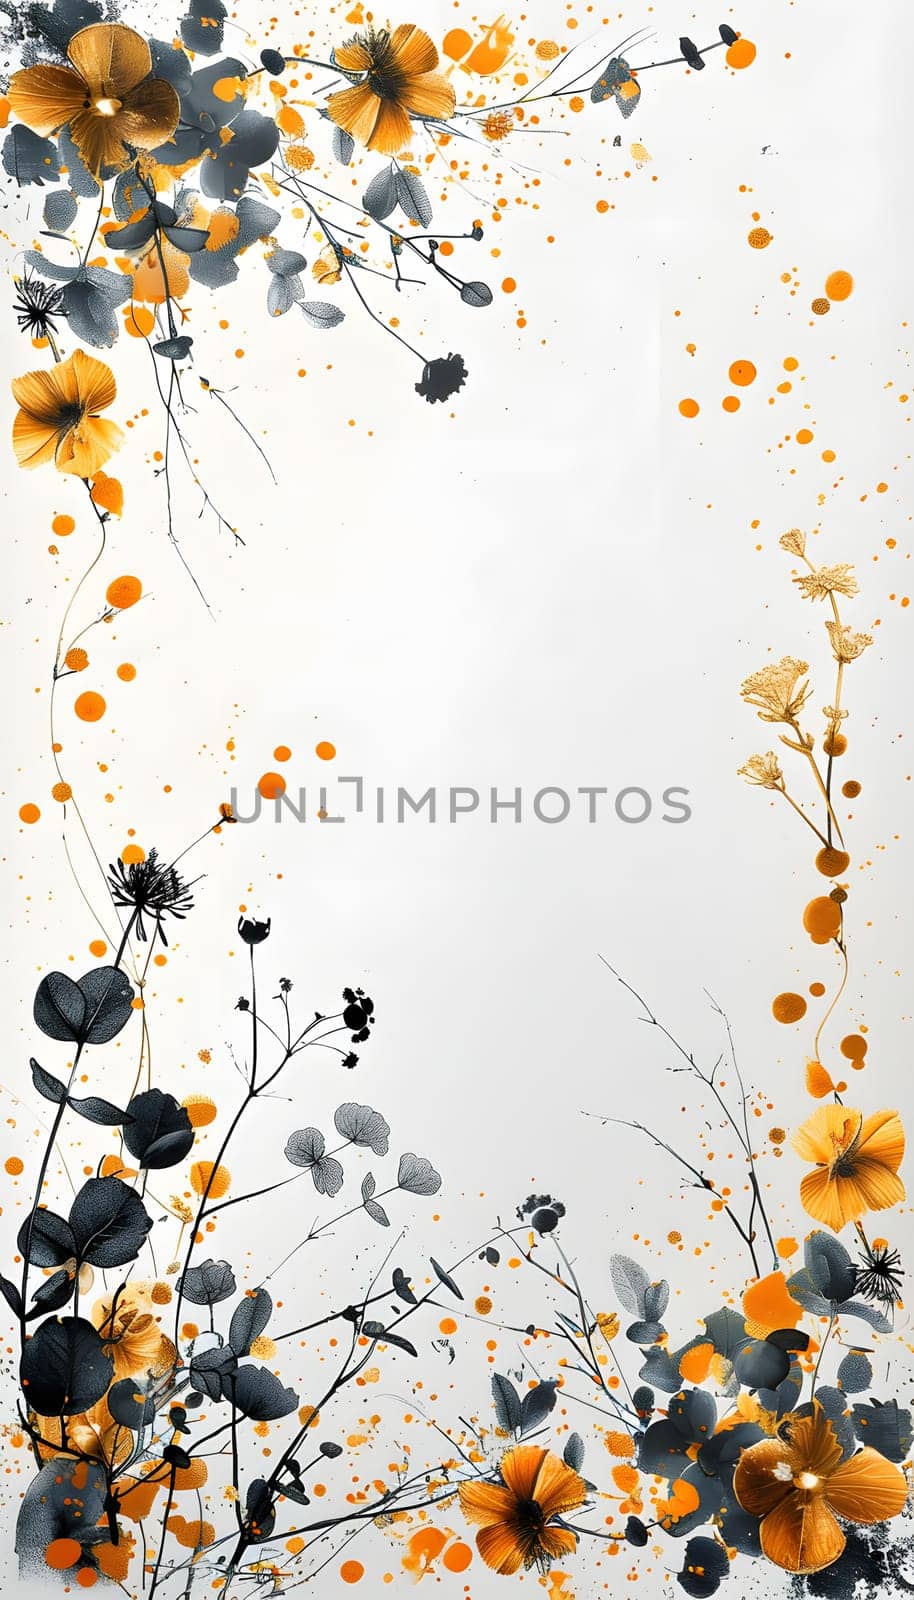 A beautiful art piece depicting yellow and black flowers on a white background, showcasing the delicate petals and natural beauty of botany